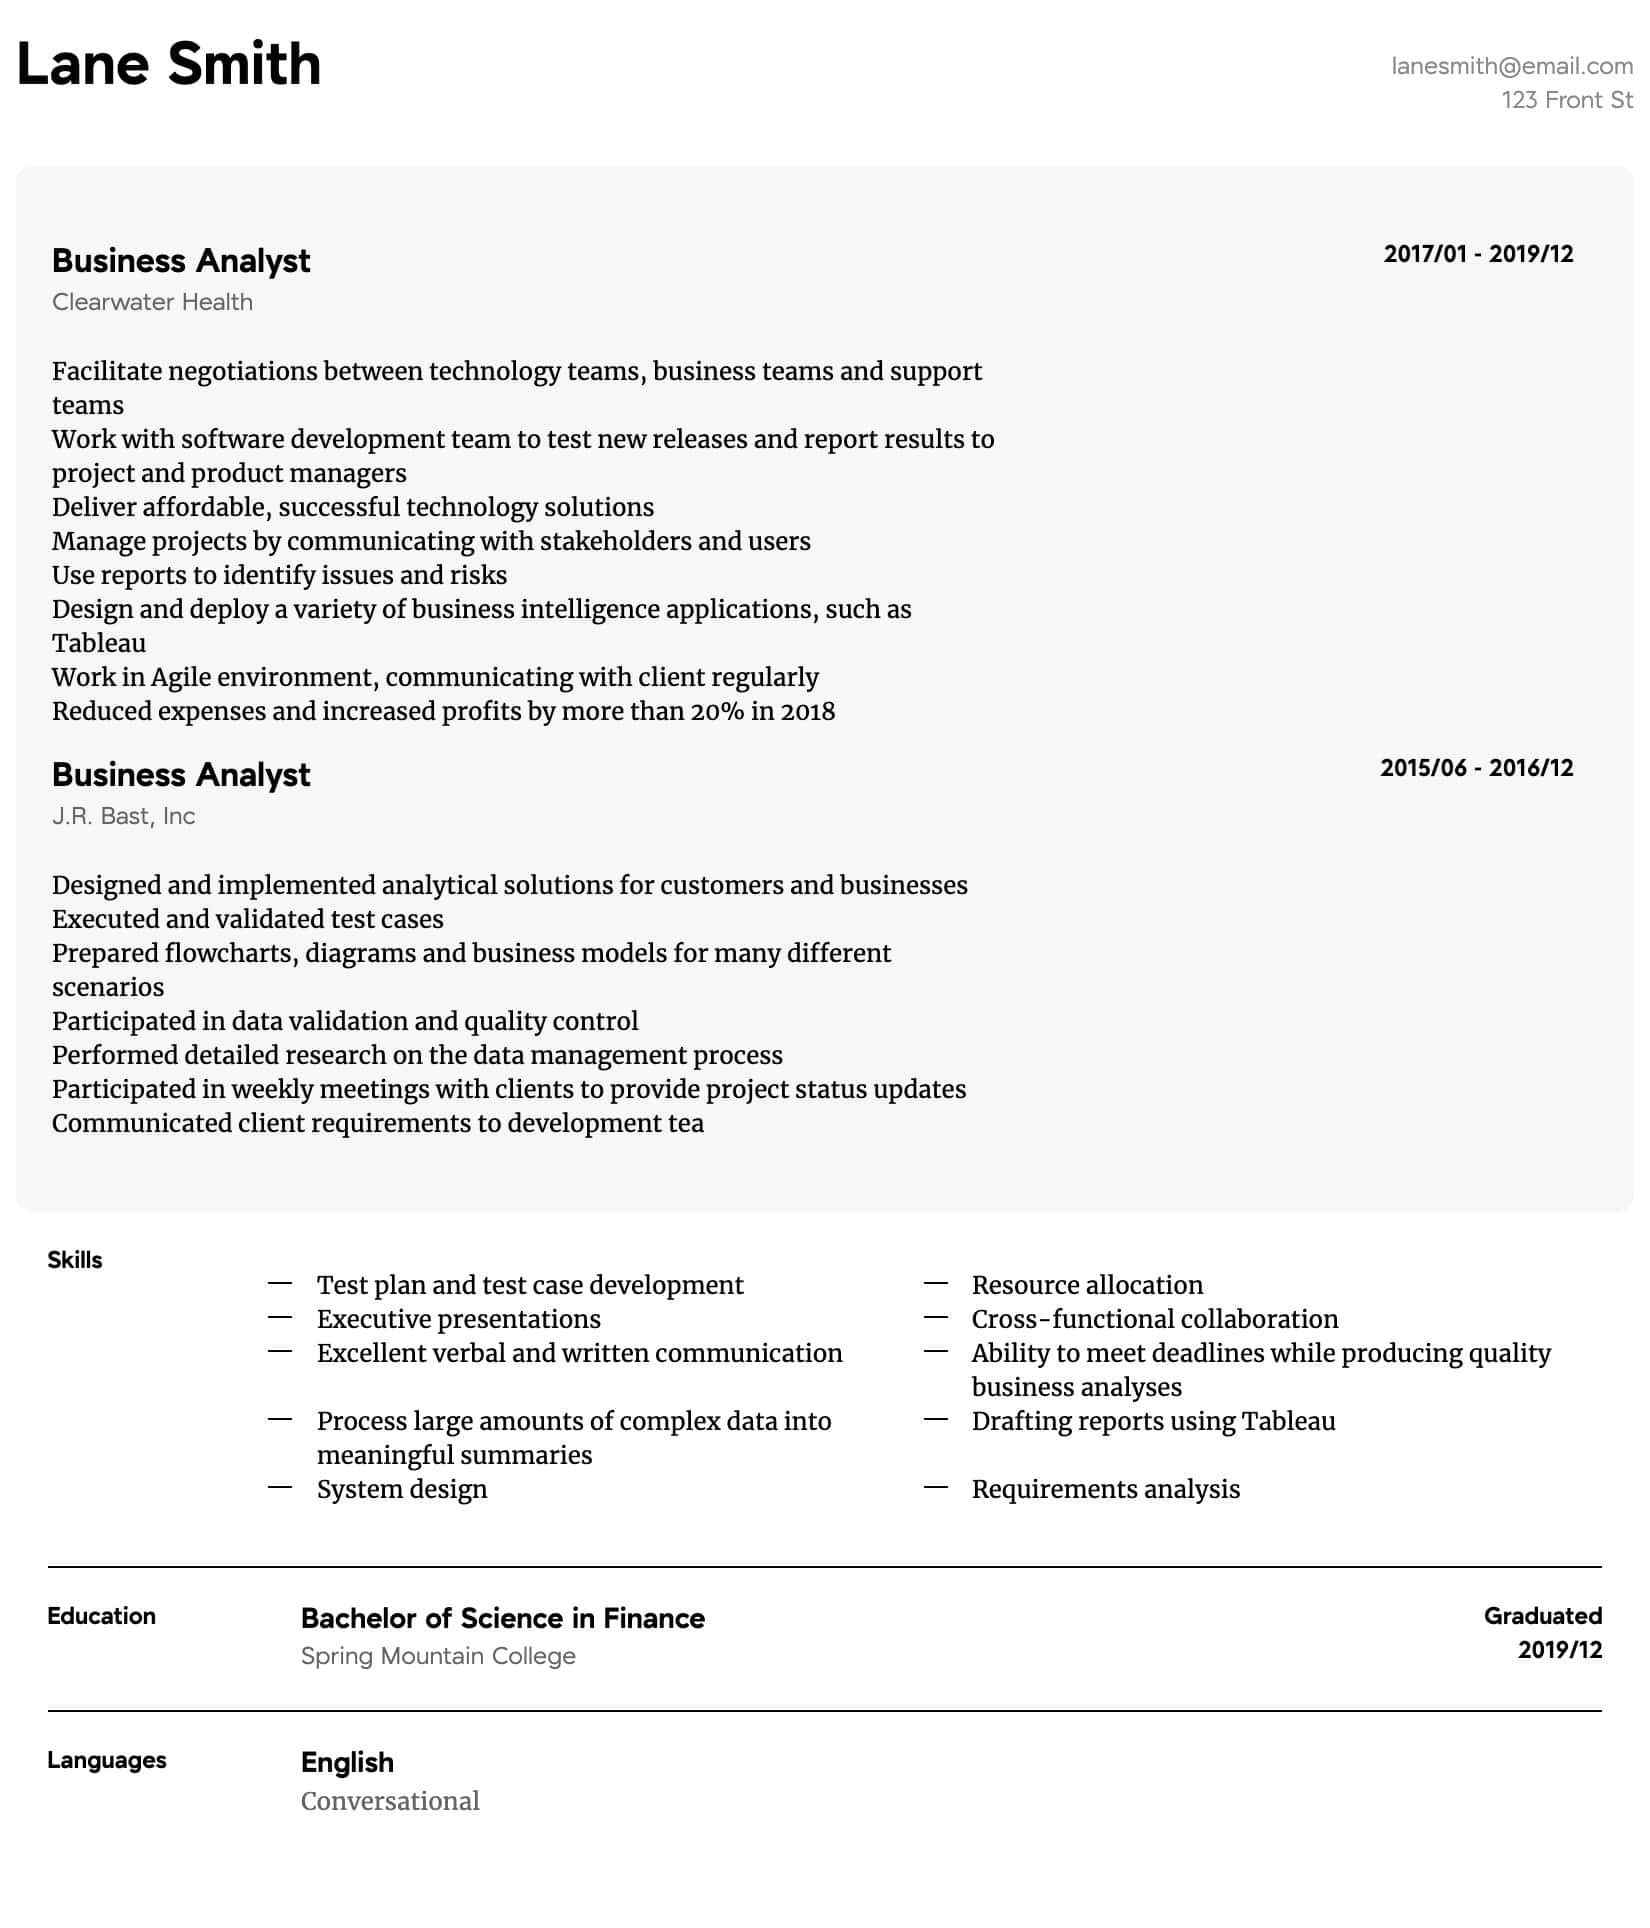 Sample Resume for Business Analyst Position Business Analyst Resume Samples All Experience Levels Resume …